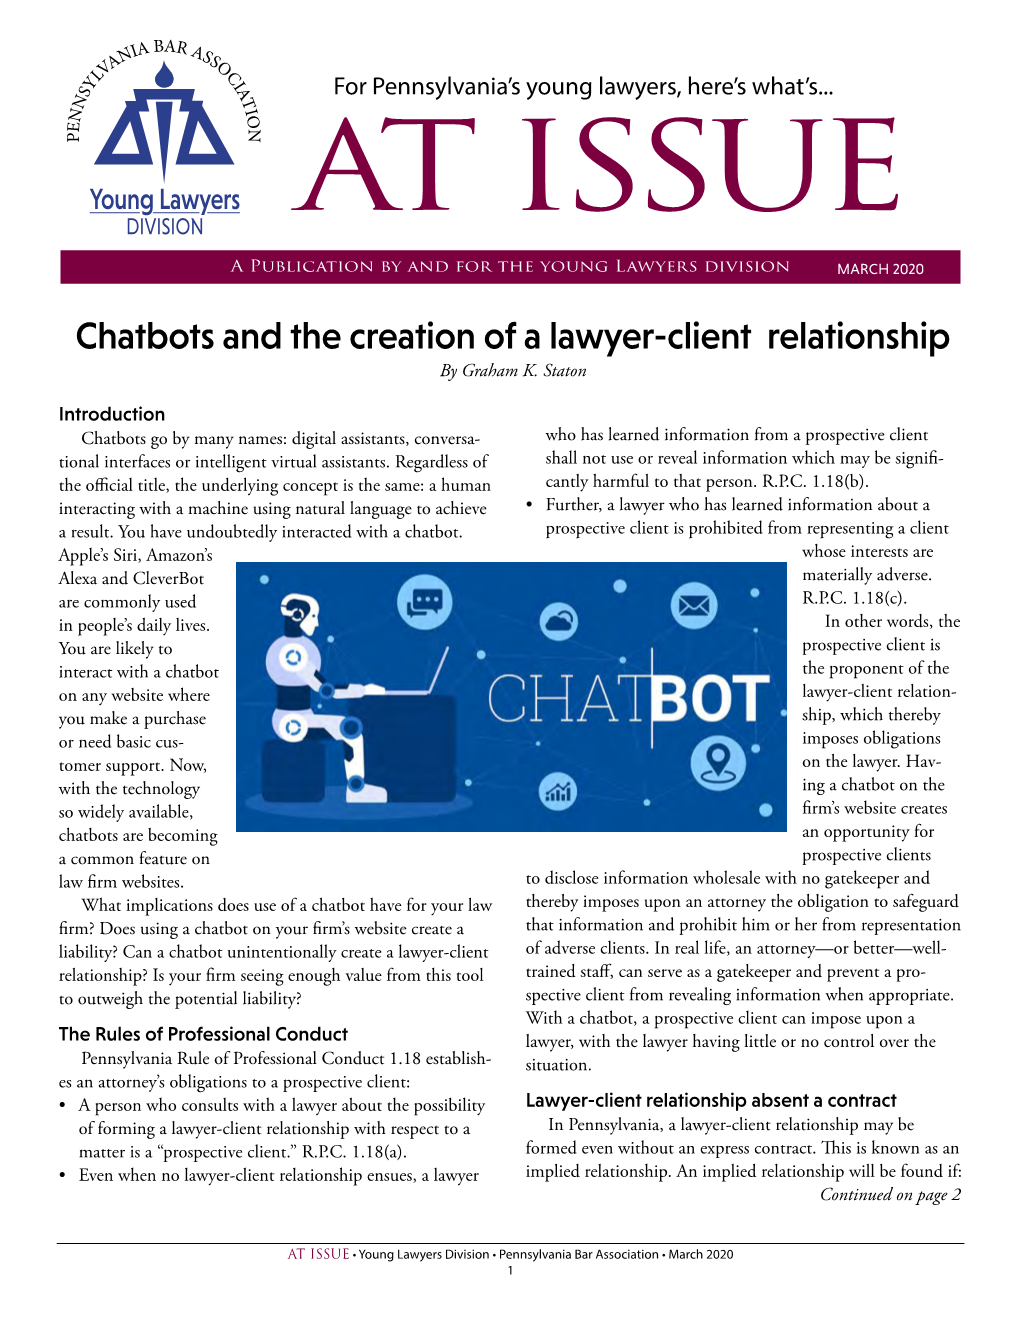 Chatbots and the Creation of a Lawyer-Client Relationship by Graham K